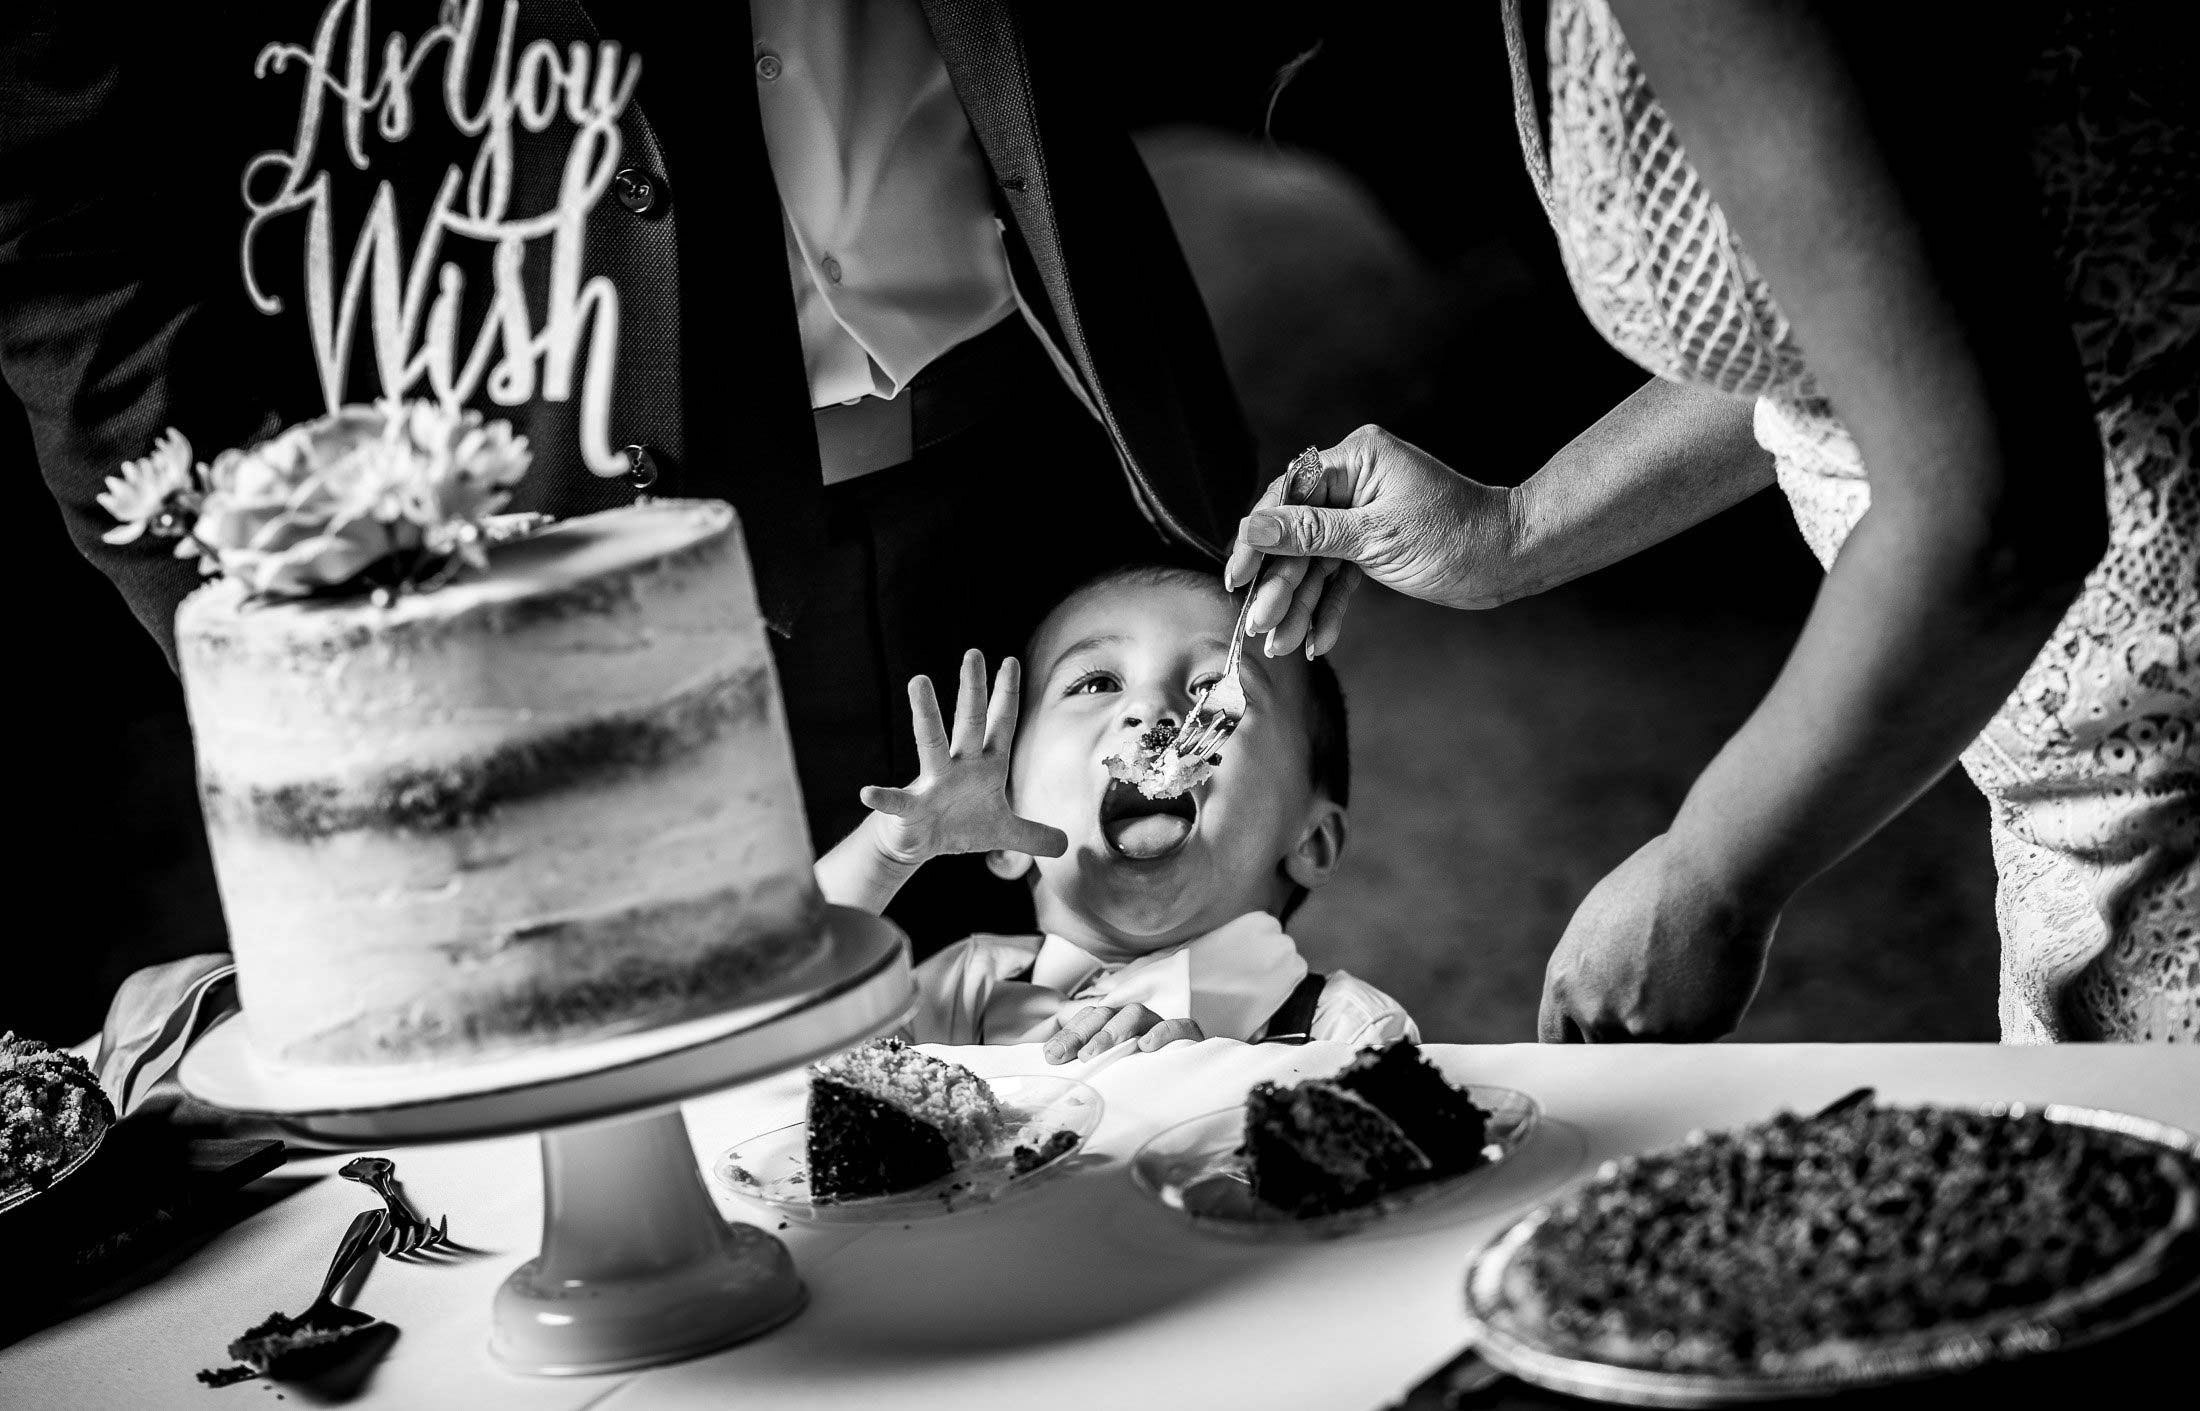 Bride feeds her nephew cake during the reception, wedding photos, wedding photography, wedding photographer, wedding inspiration, wedding photo inspiration, mountain wedding, YMCA of the Rockies wedding, YMCA of the Rockies wedding photos, YMCA of the Rockies wedding photography, YMCA of the Rockies wedding photographer, YMCA of the Rockies wedding inspiration, YMCA of the Rockies wedding venue, Estes Park wedding, Estes Park wedding photos, Estes Park wedding photography, Estes Park wedding photographer, Colorado wedding, Colorado wedding photos, Colorado wedding photography, Colorado wedding photographer, Colorado mountain wedding, Colorado wedding inspiration